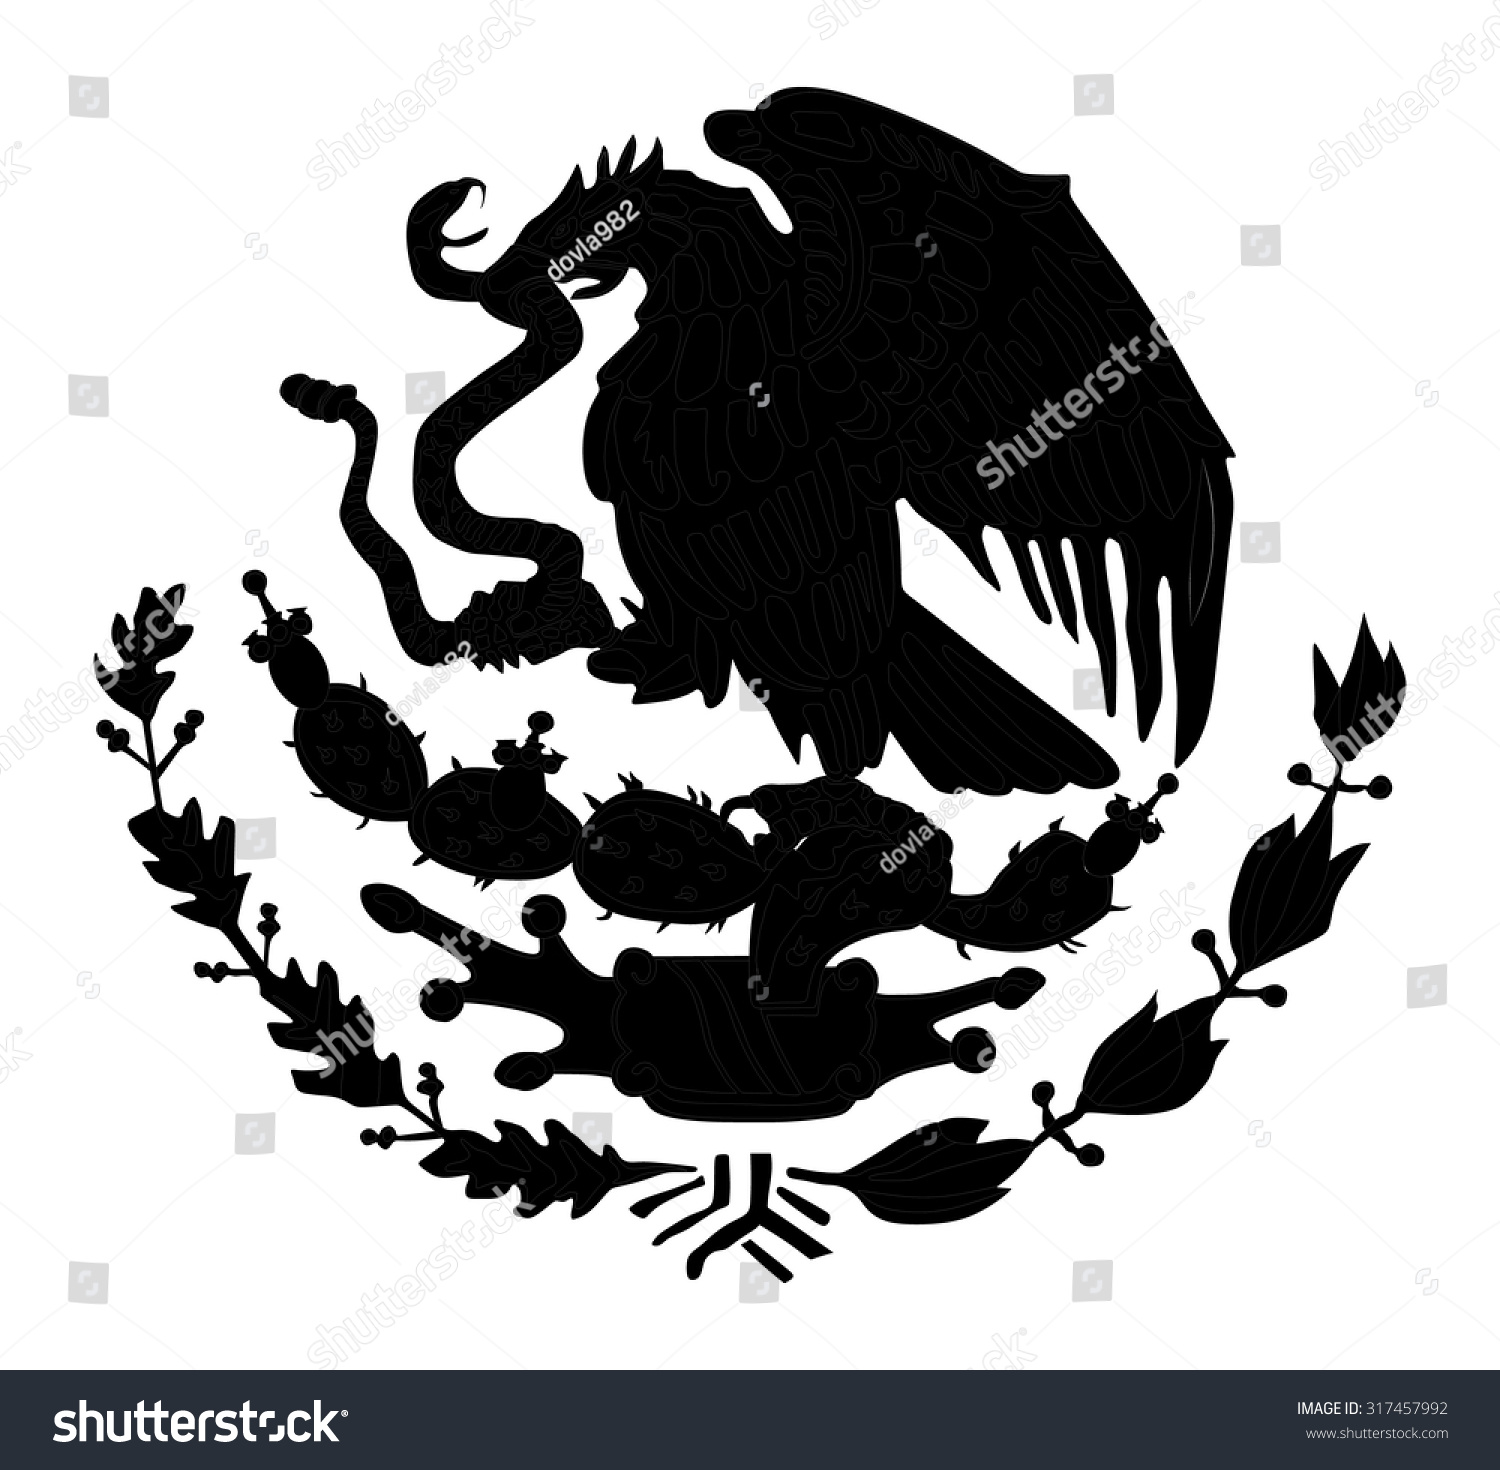 Mexico Coat Arms Seal National Emblem Stock Vector 317457992 - Shutterstock